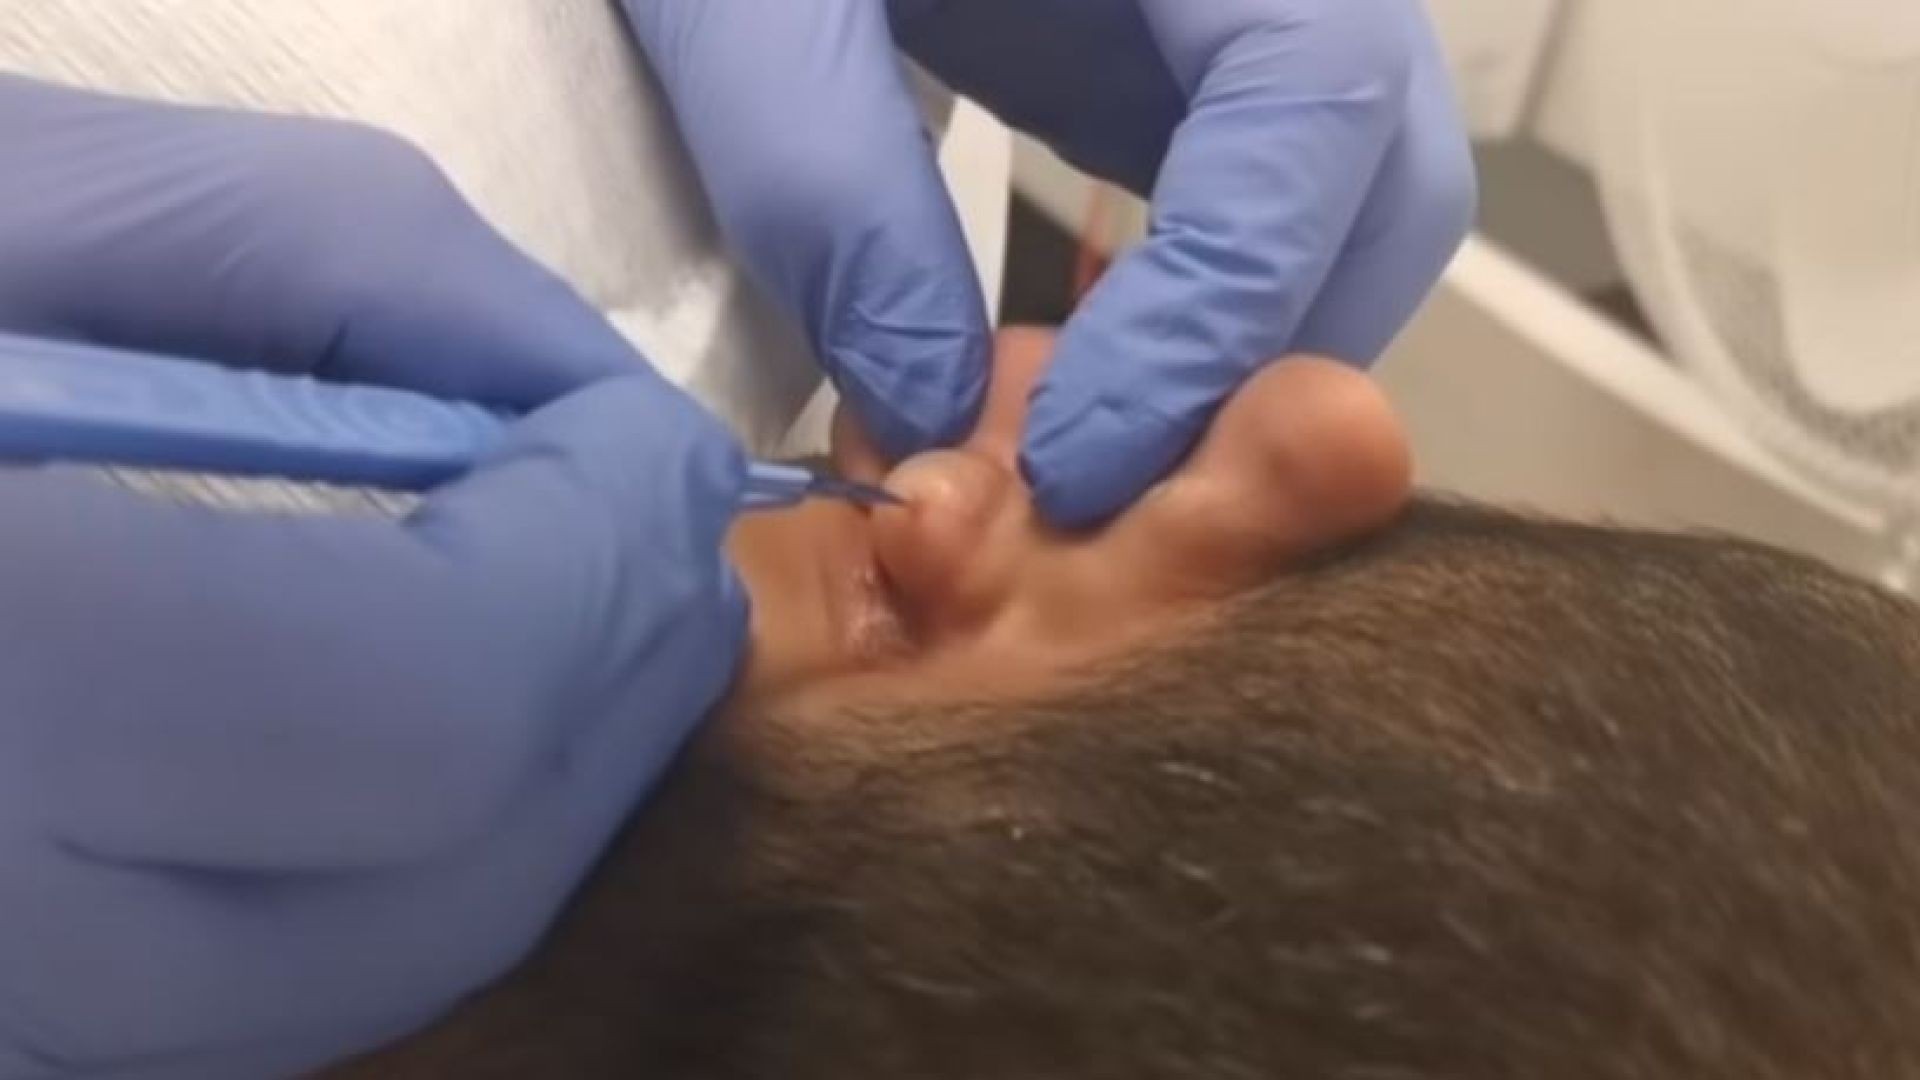 Massive multiple ear cyst Removed. Part 1 of 2